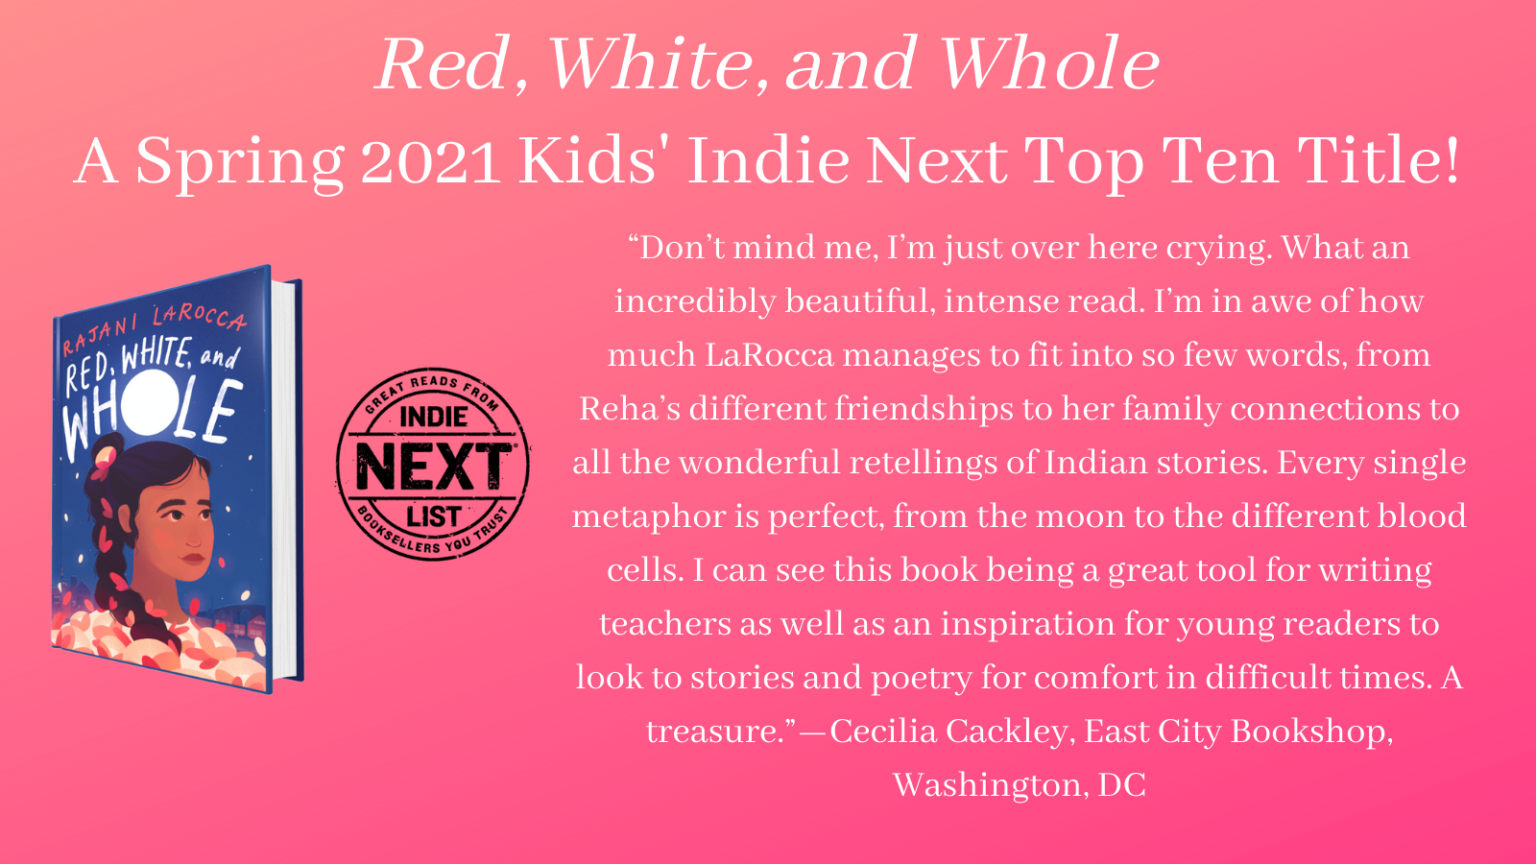 RED, WHITE, AND WHOLE is a Spring 2021 Kids’ Indie Next Top Ten Title!